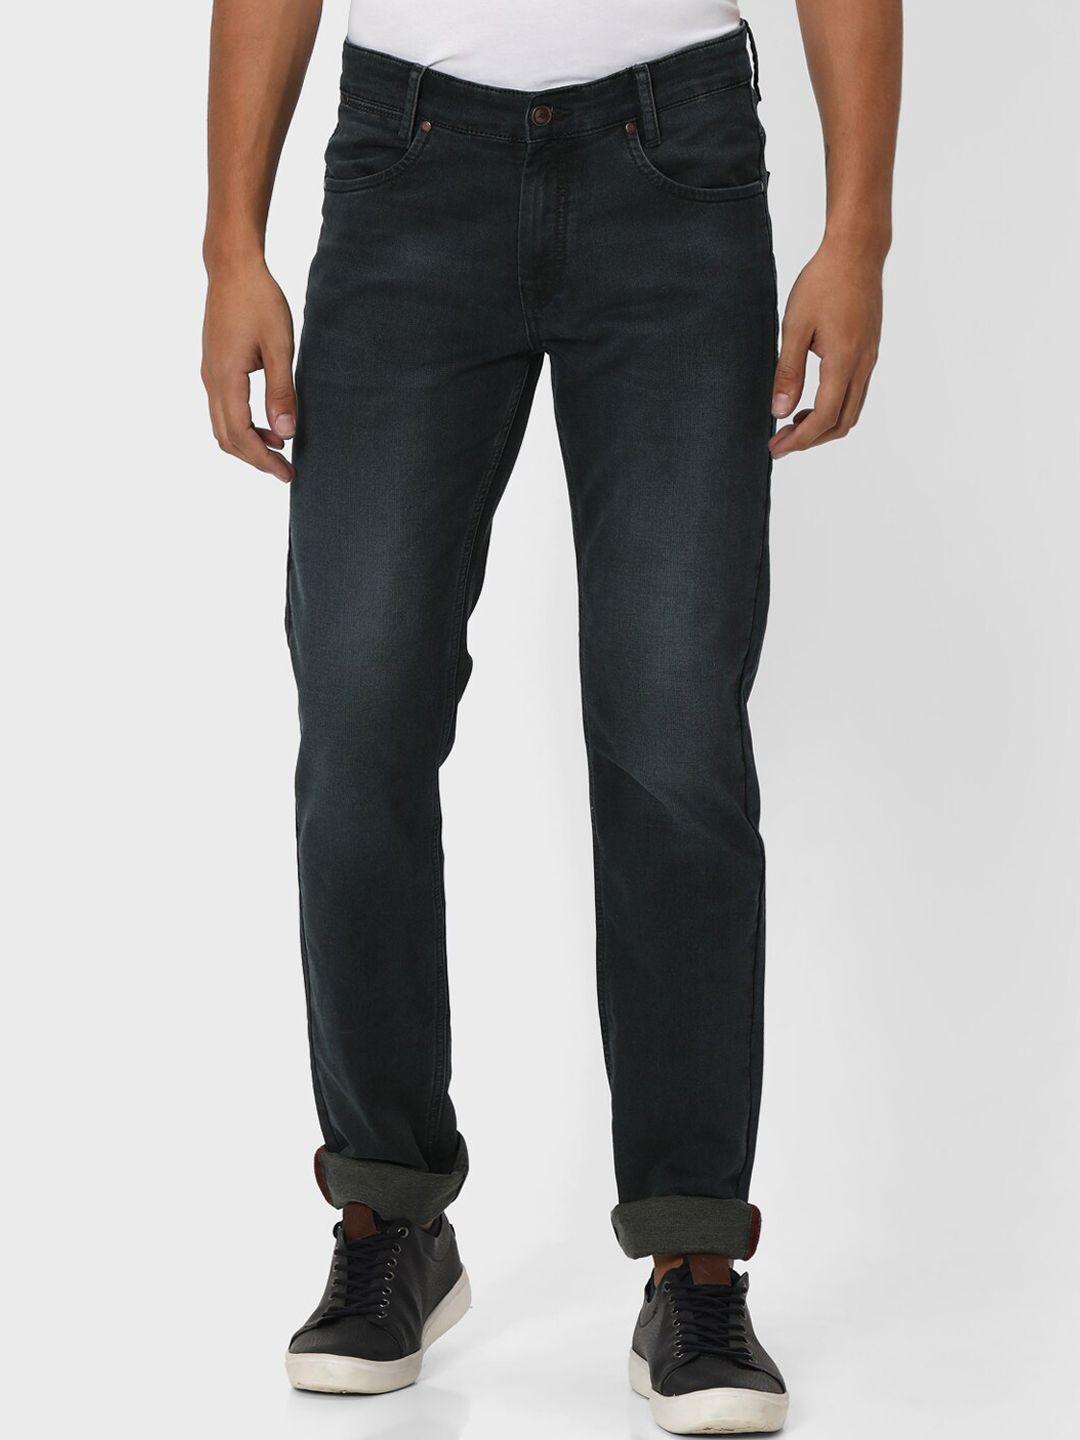 mufti-men-slim-fit-light-fade-stretchable-jeans